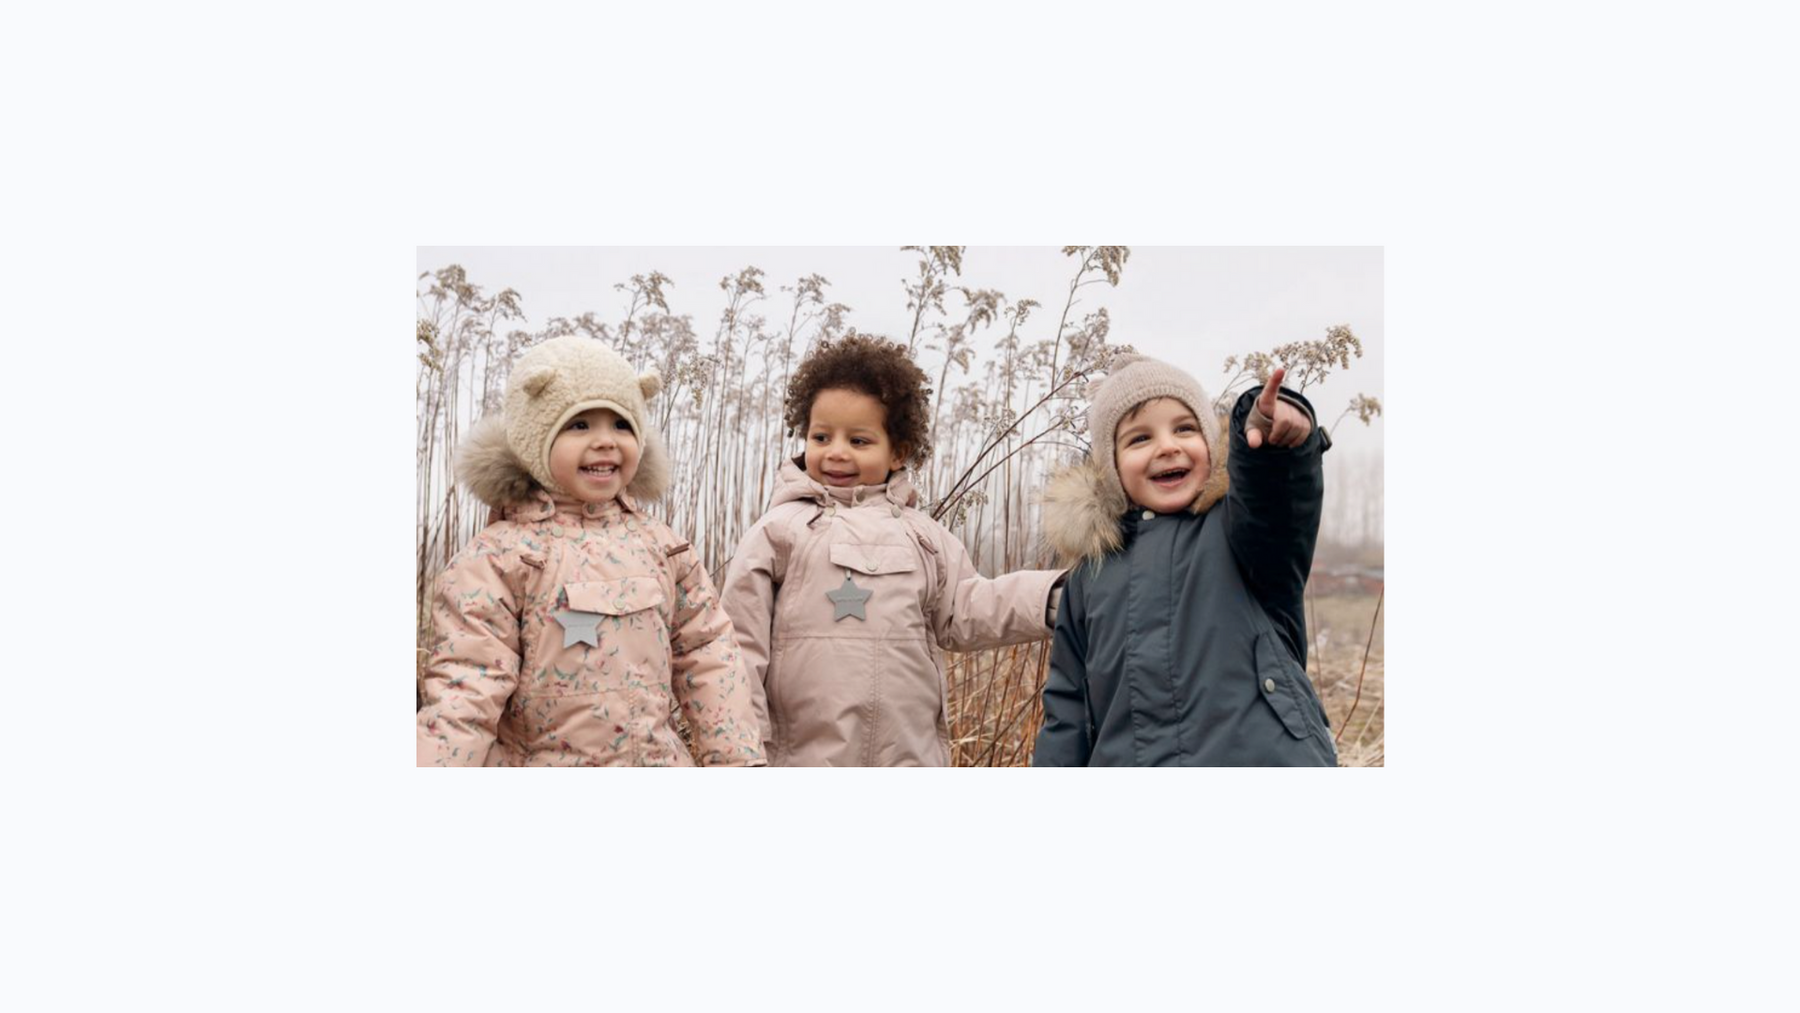 Wintersuits: MINI A TURE's 5 essential criteria to keep our children warm